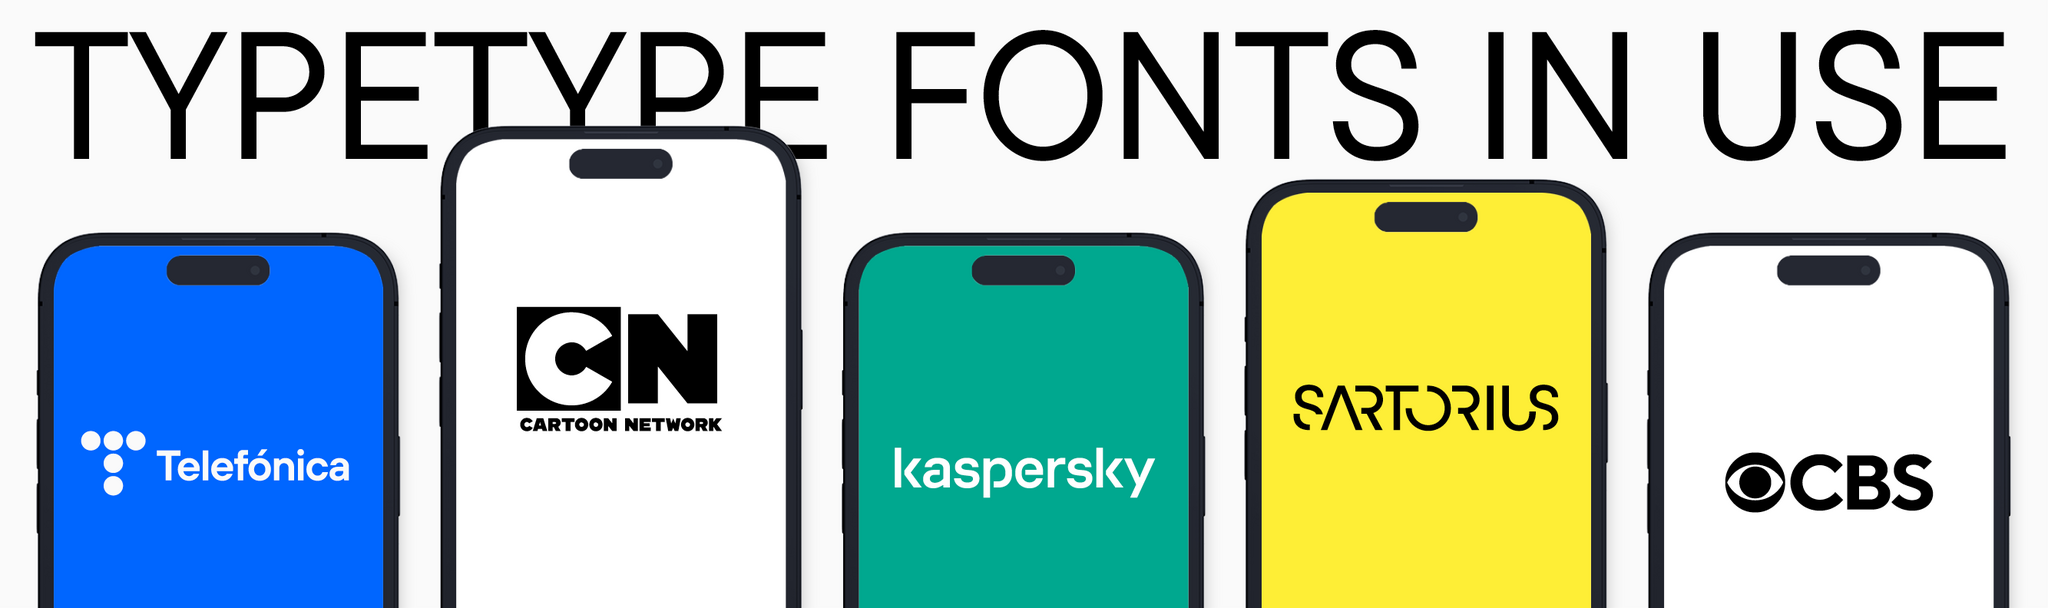 Fonts in use